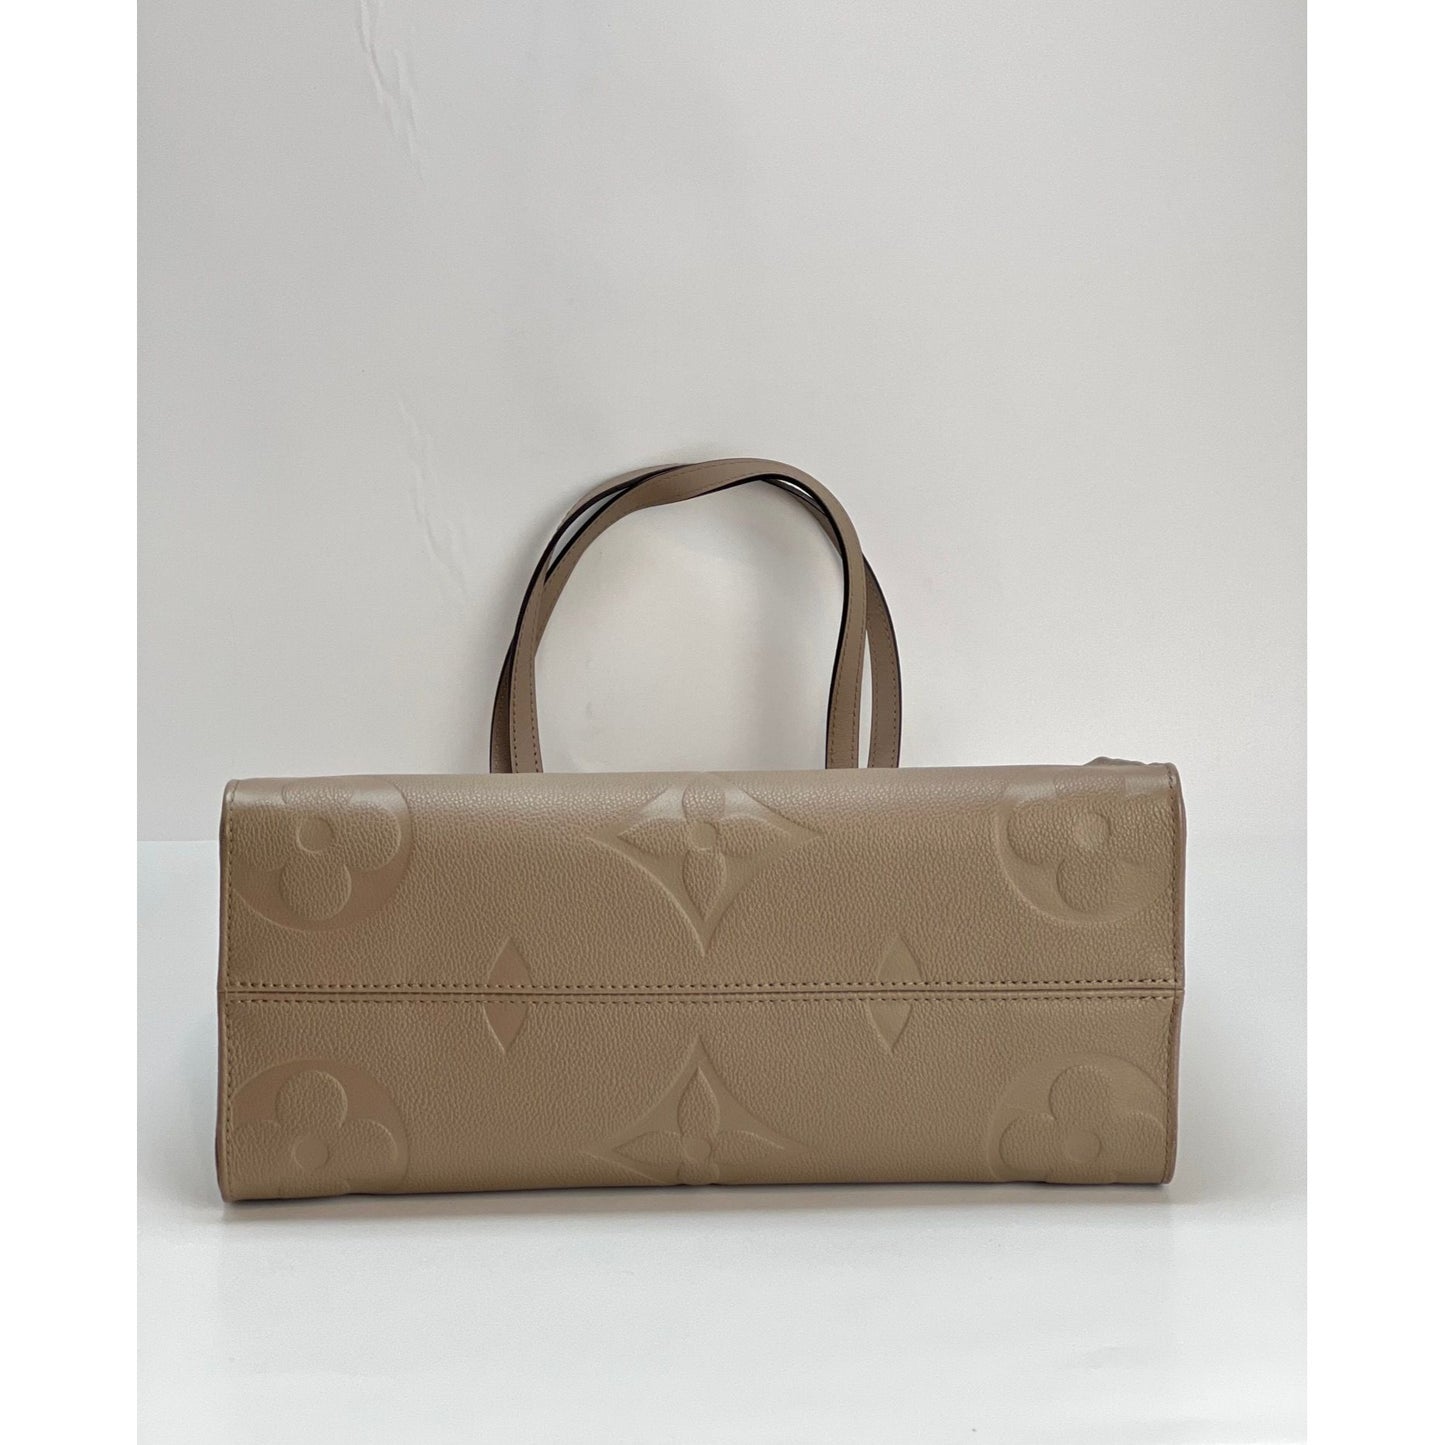 Louis+Vuitton+OnTheGo+Tote+MM+Gray+Leather for sale online